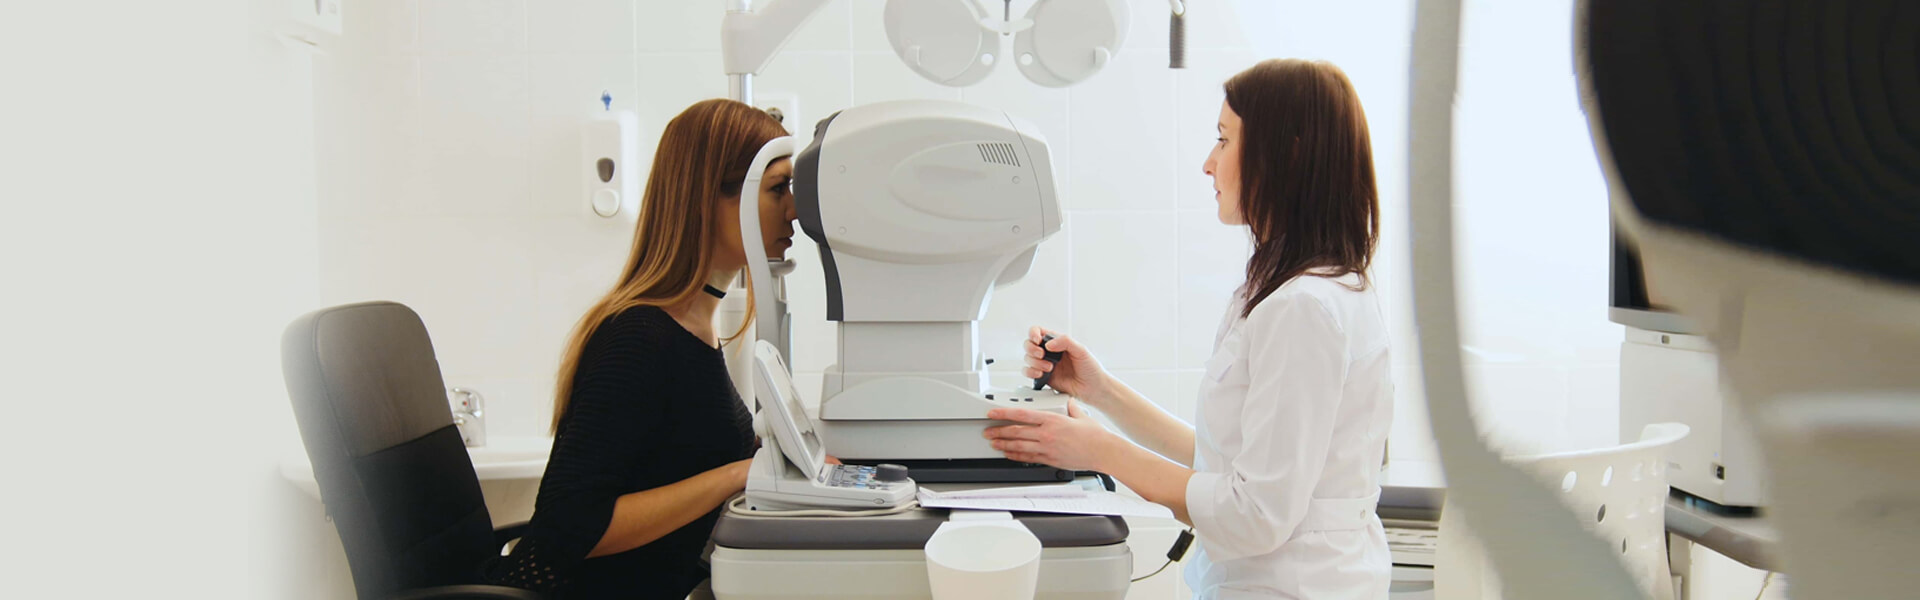 Regular Glaucoma Test Essential To Prevent Vision Loss